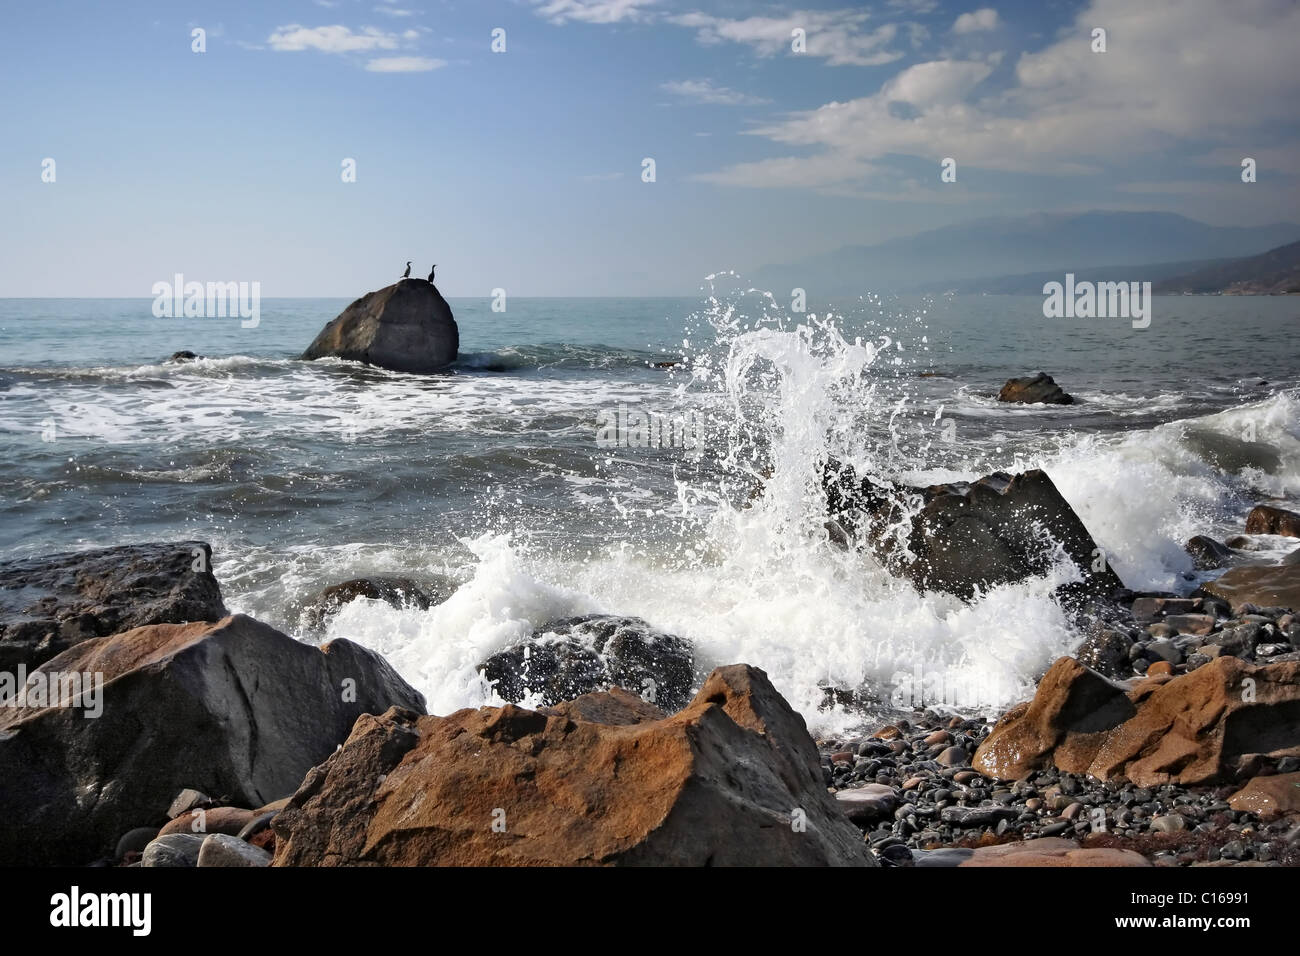 Coast of Black sea. Breaking waves and stones against a two divers. Crimea. Ukraine. Stock Photo